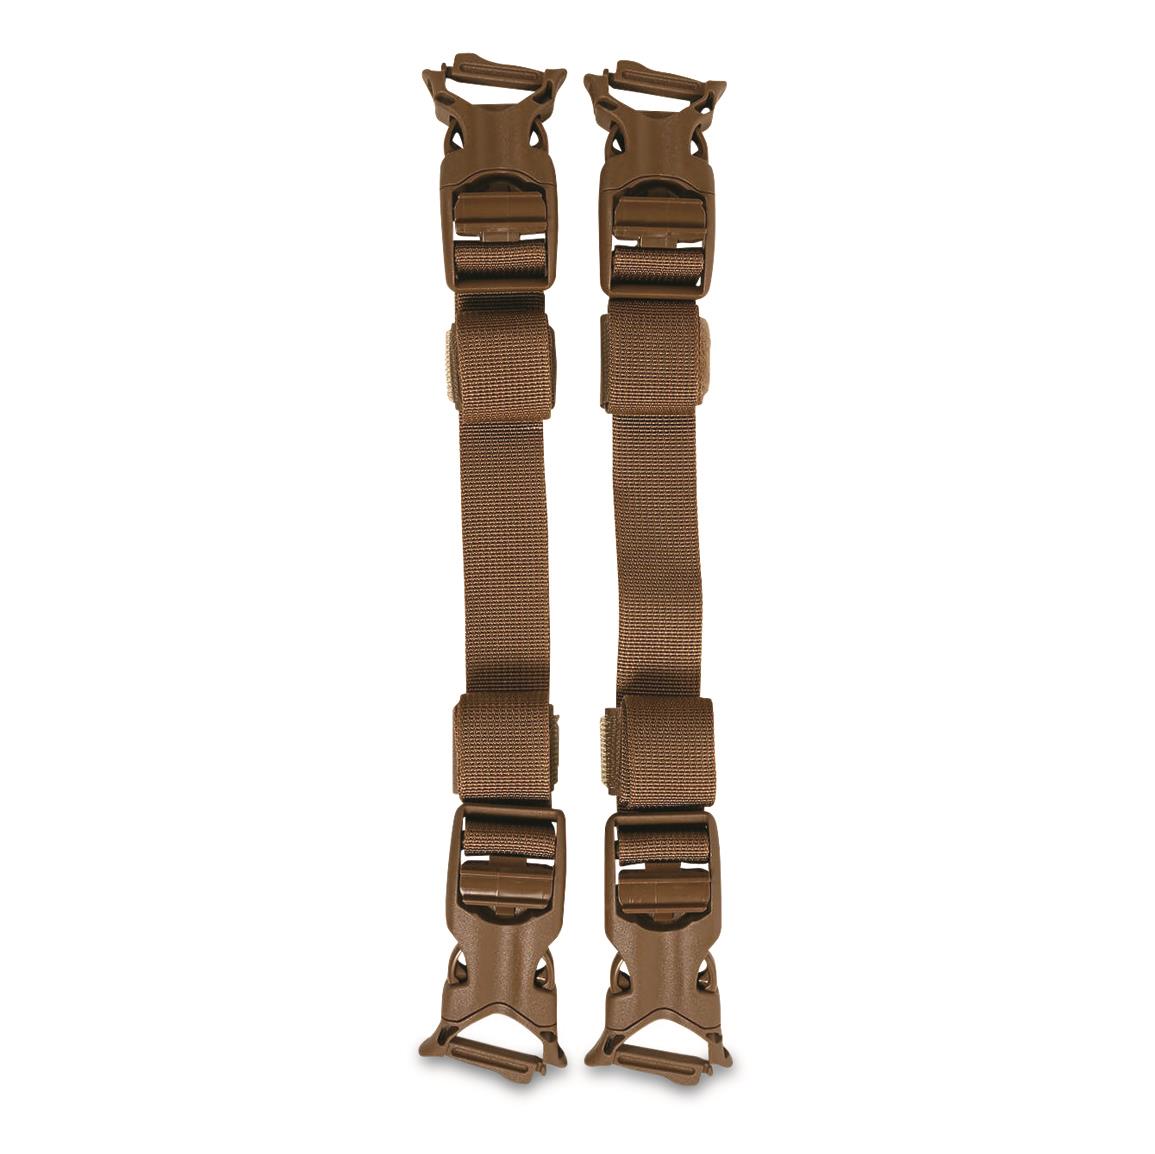 Mystery Ranch Quick Attach Accessory Straps, 2 Pack, Coyote